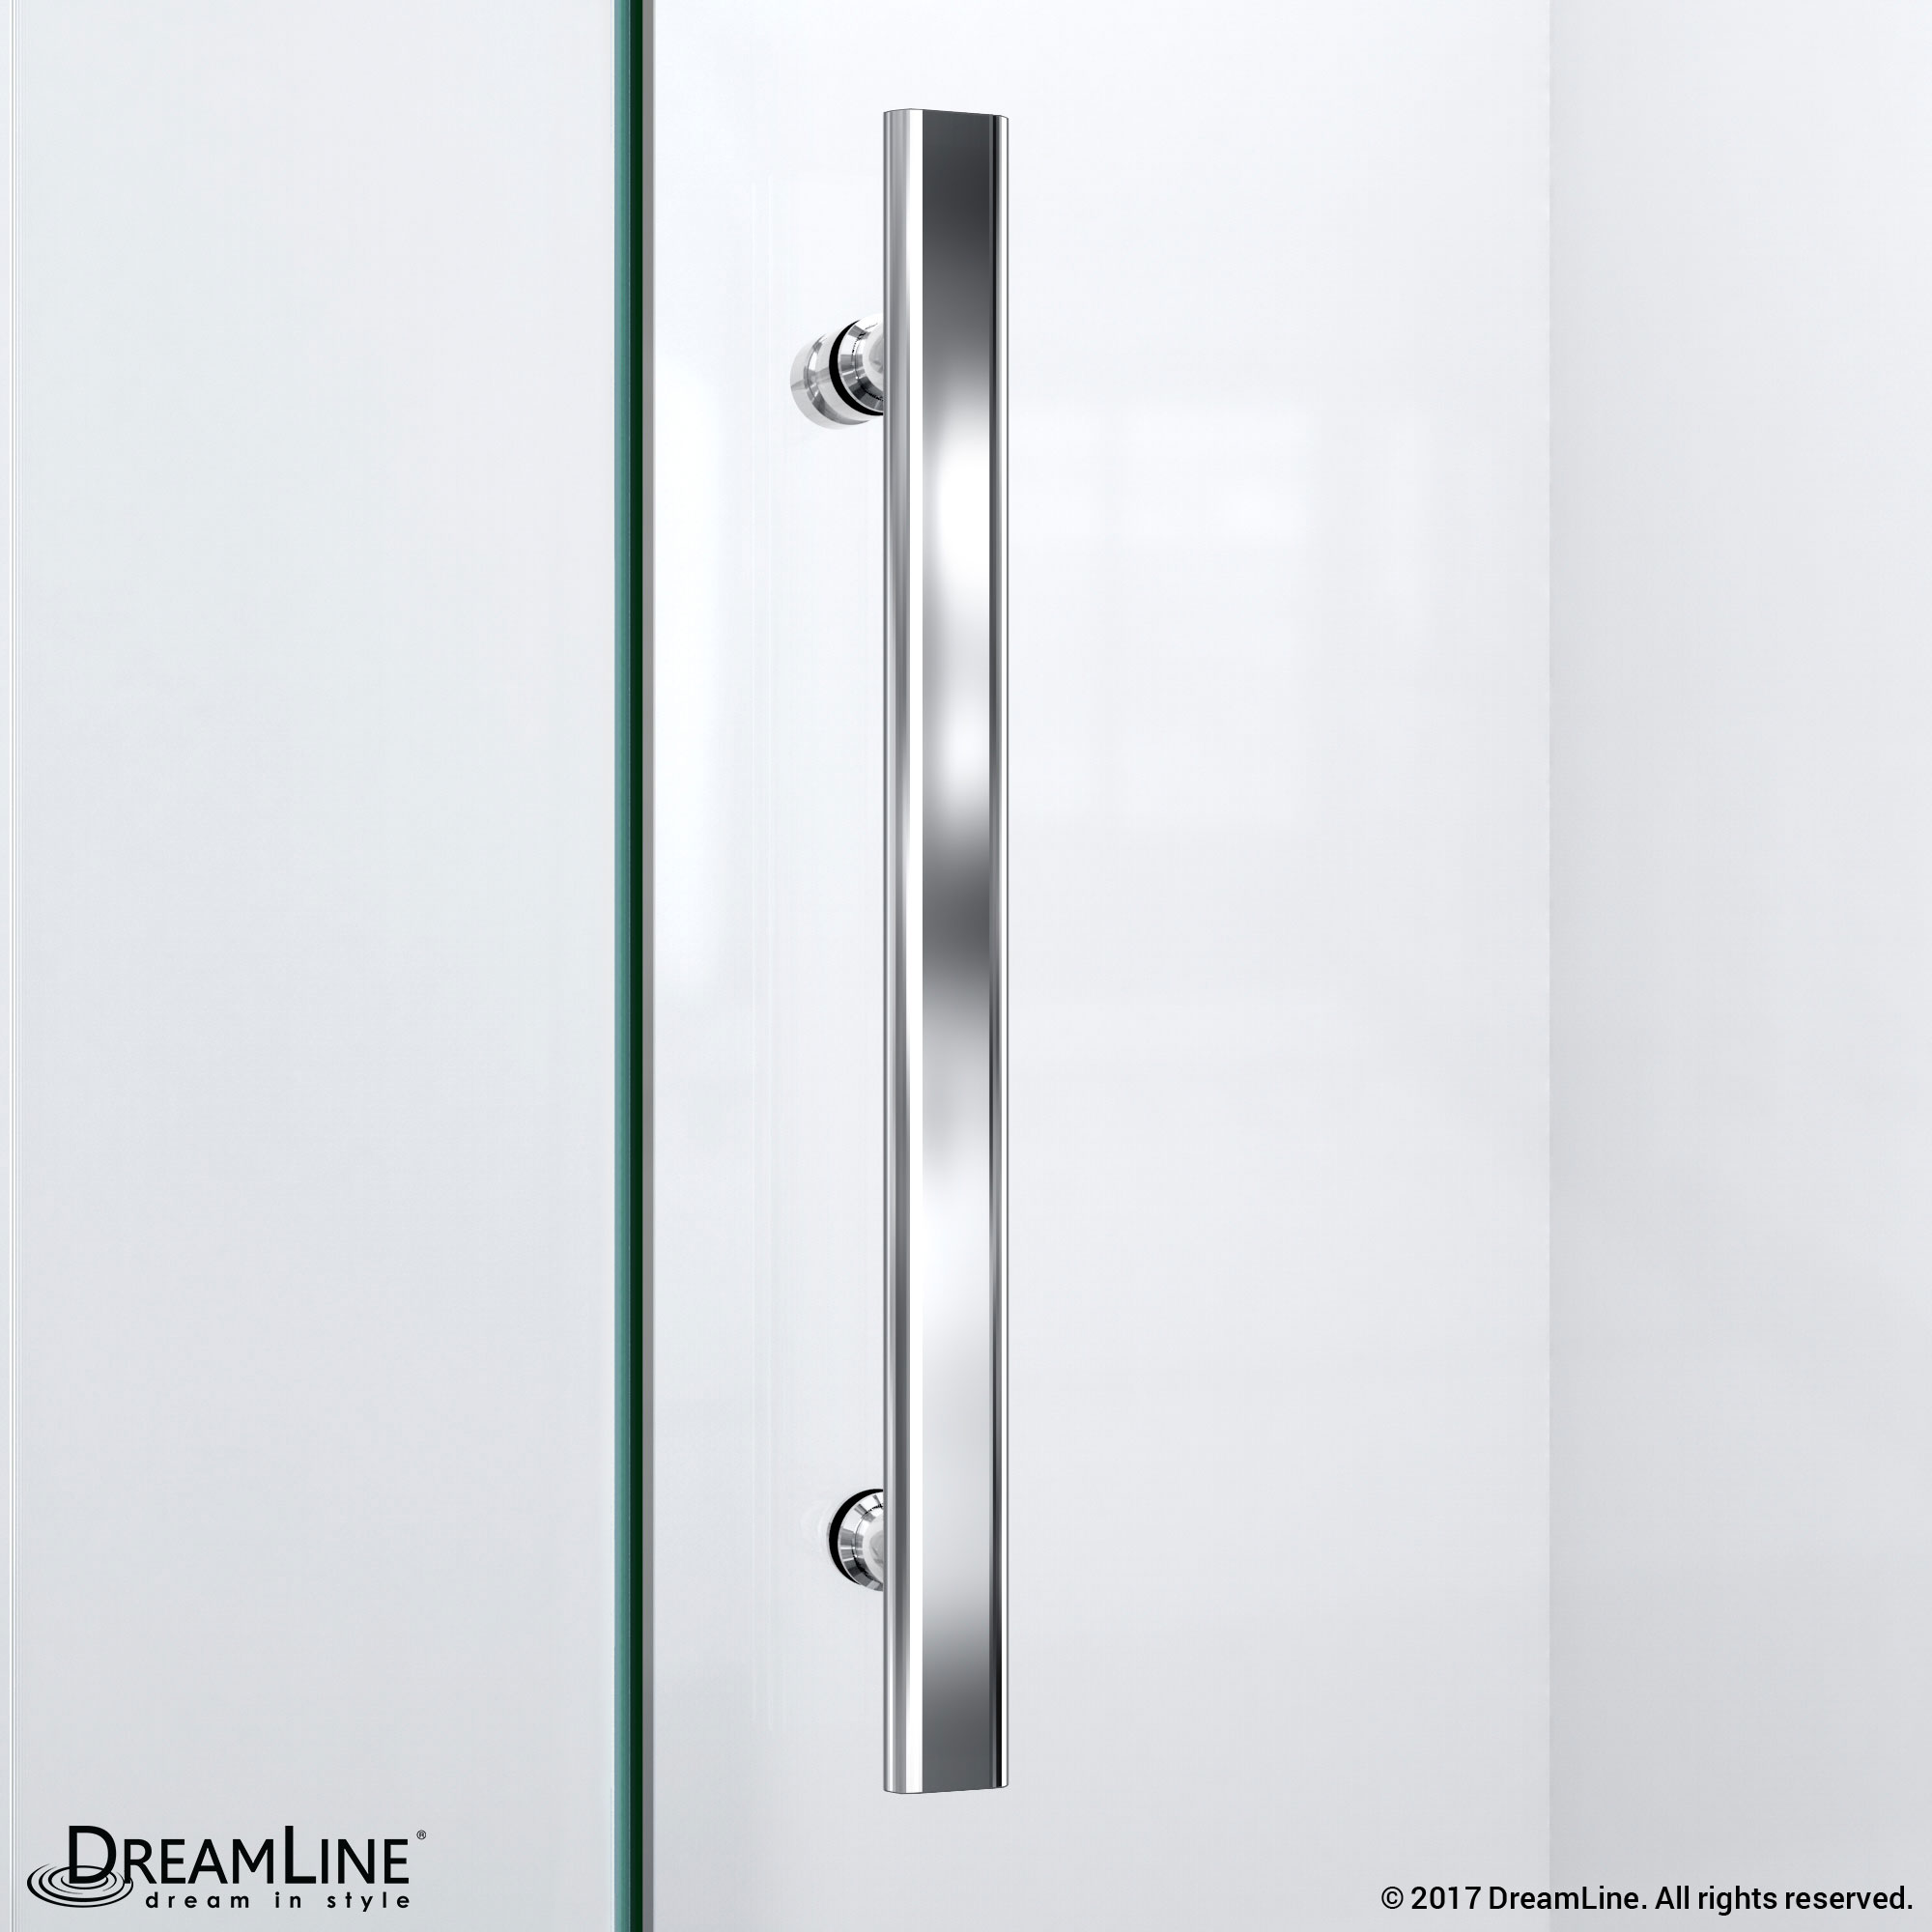 QuatraLux 34 5/16" by 46 5/16" Frameless Hinged Shower Enclosure, Clear 3/8" Glass Shower, Chrome